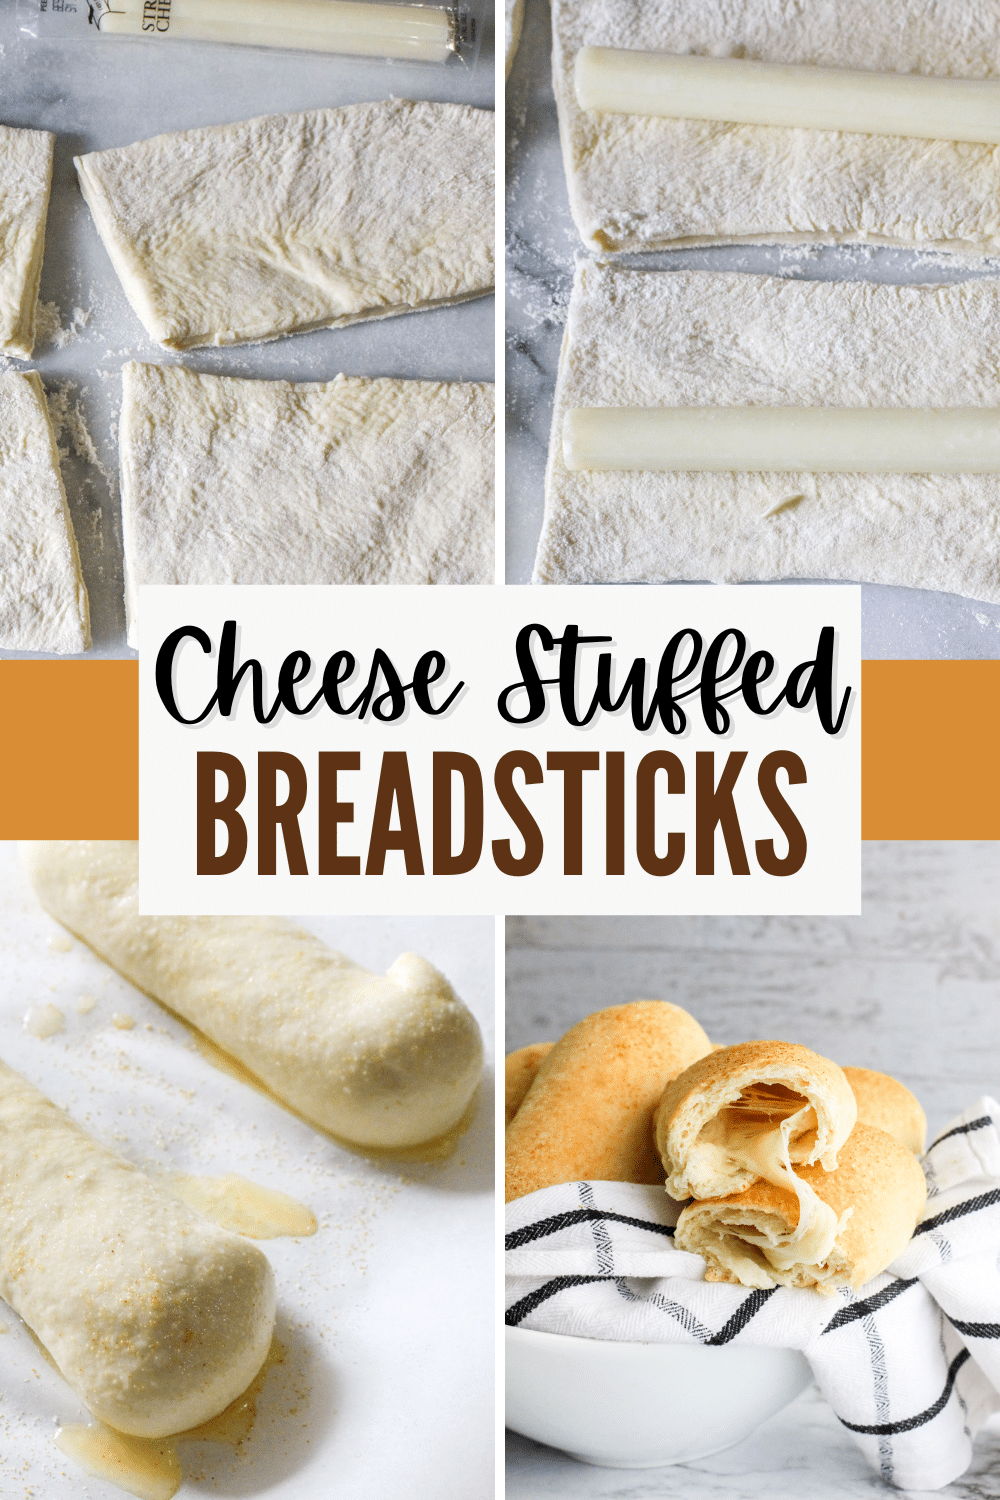 Breadsticks stuffed with cheese.